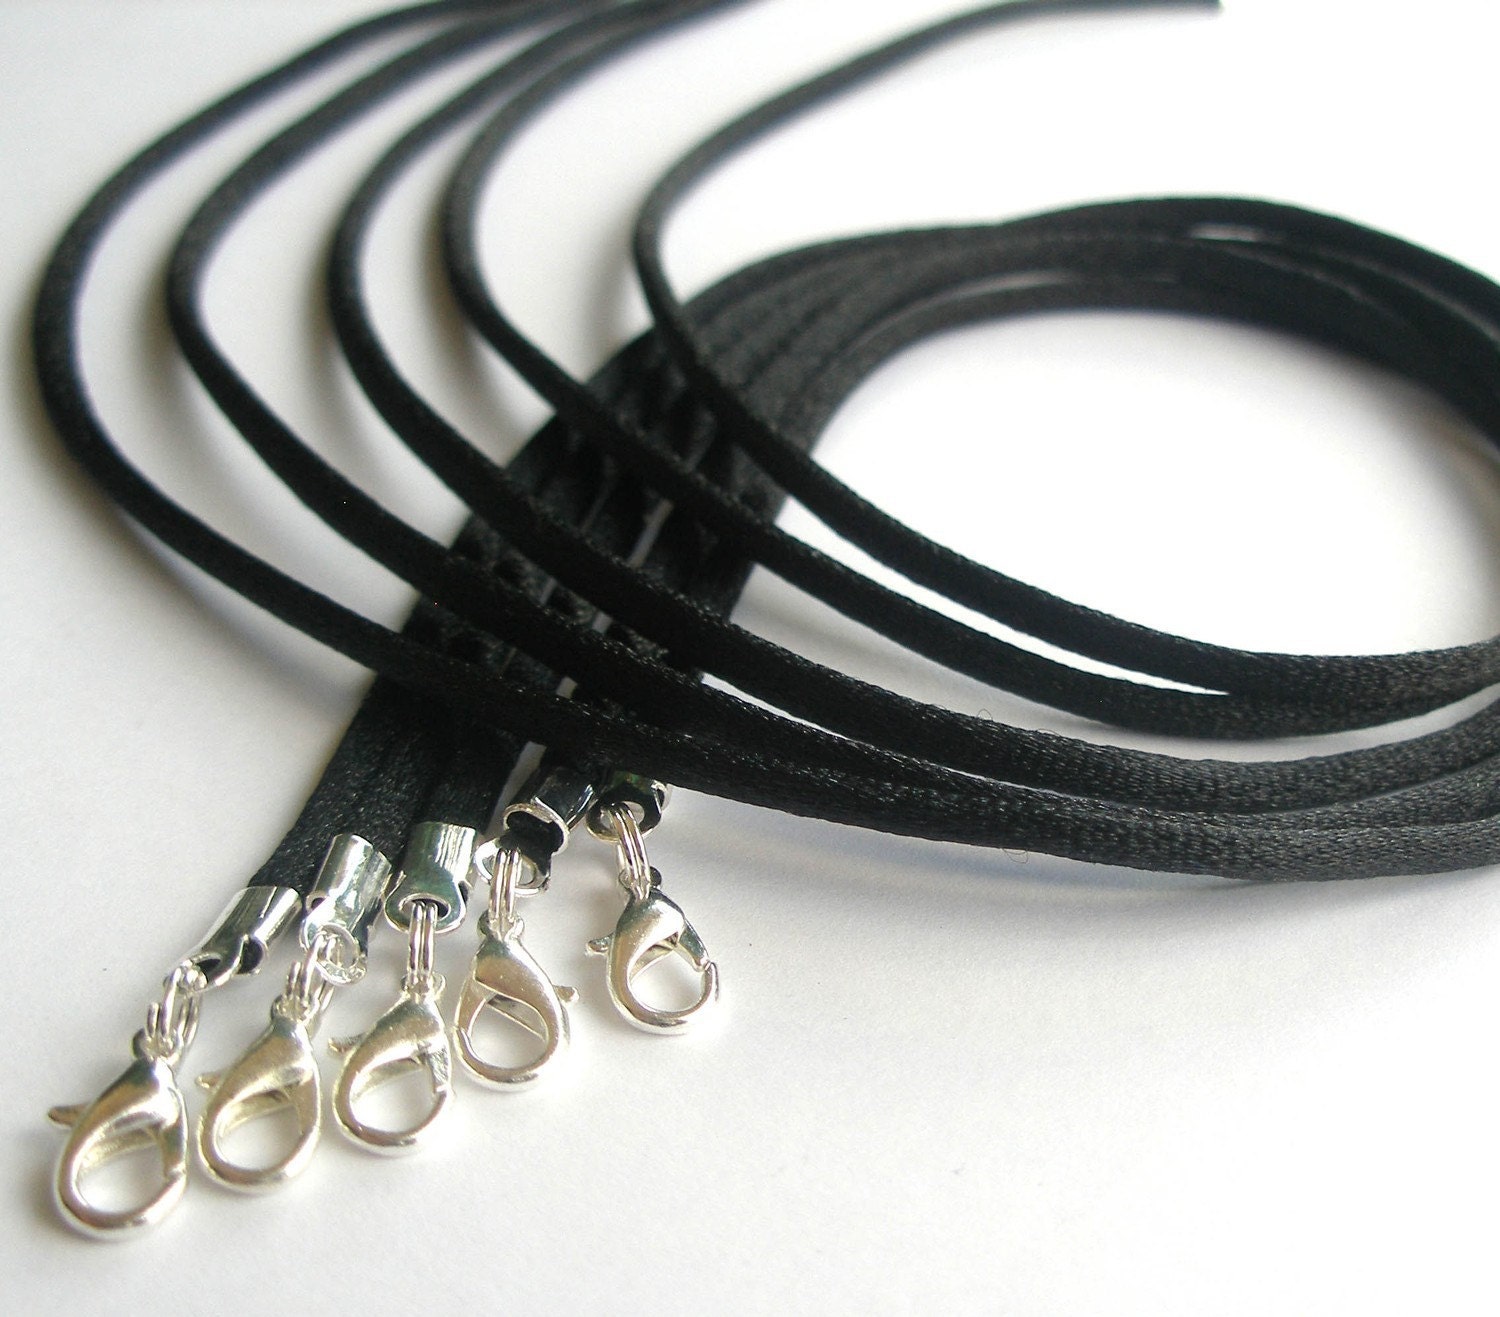 20 - Thick Rattail Necklace Cords - Any length - 8 Colors - For Lg Pendants, Pandora Beads or Lg Bails - Handmade in USA